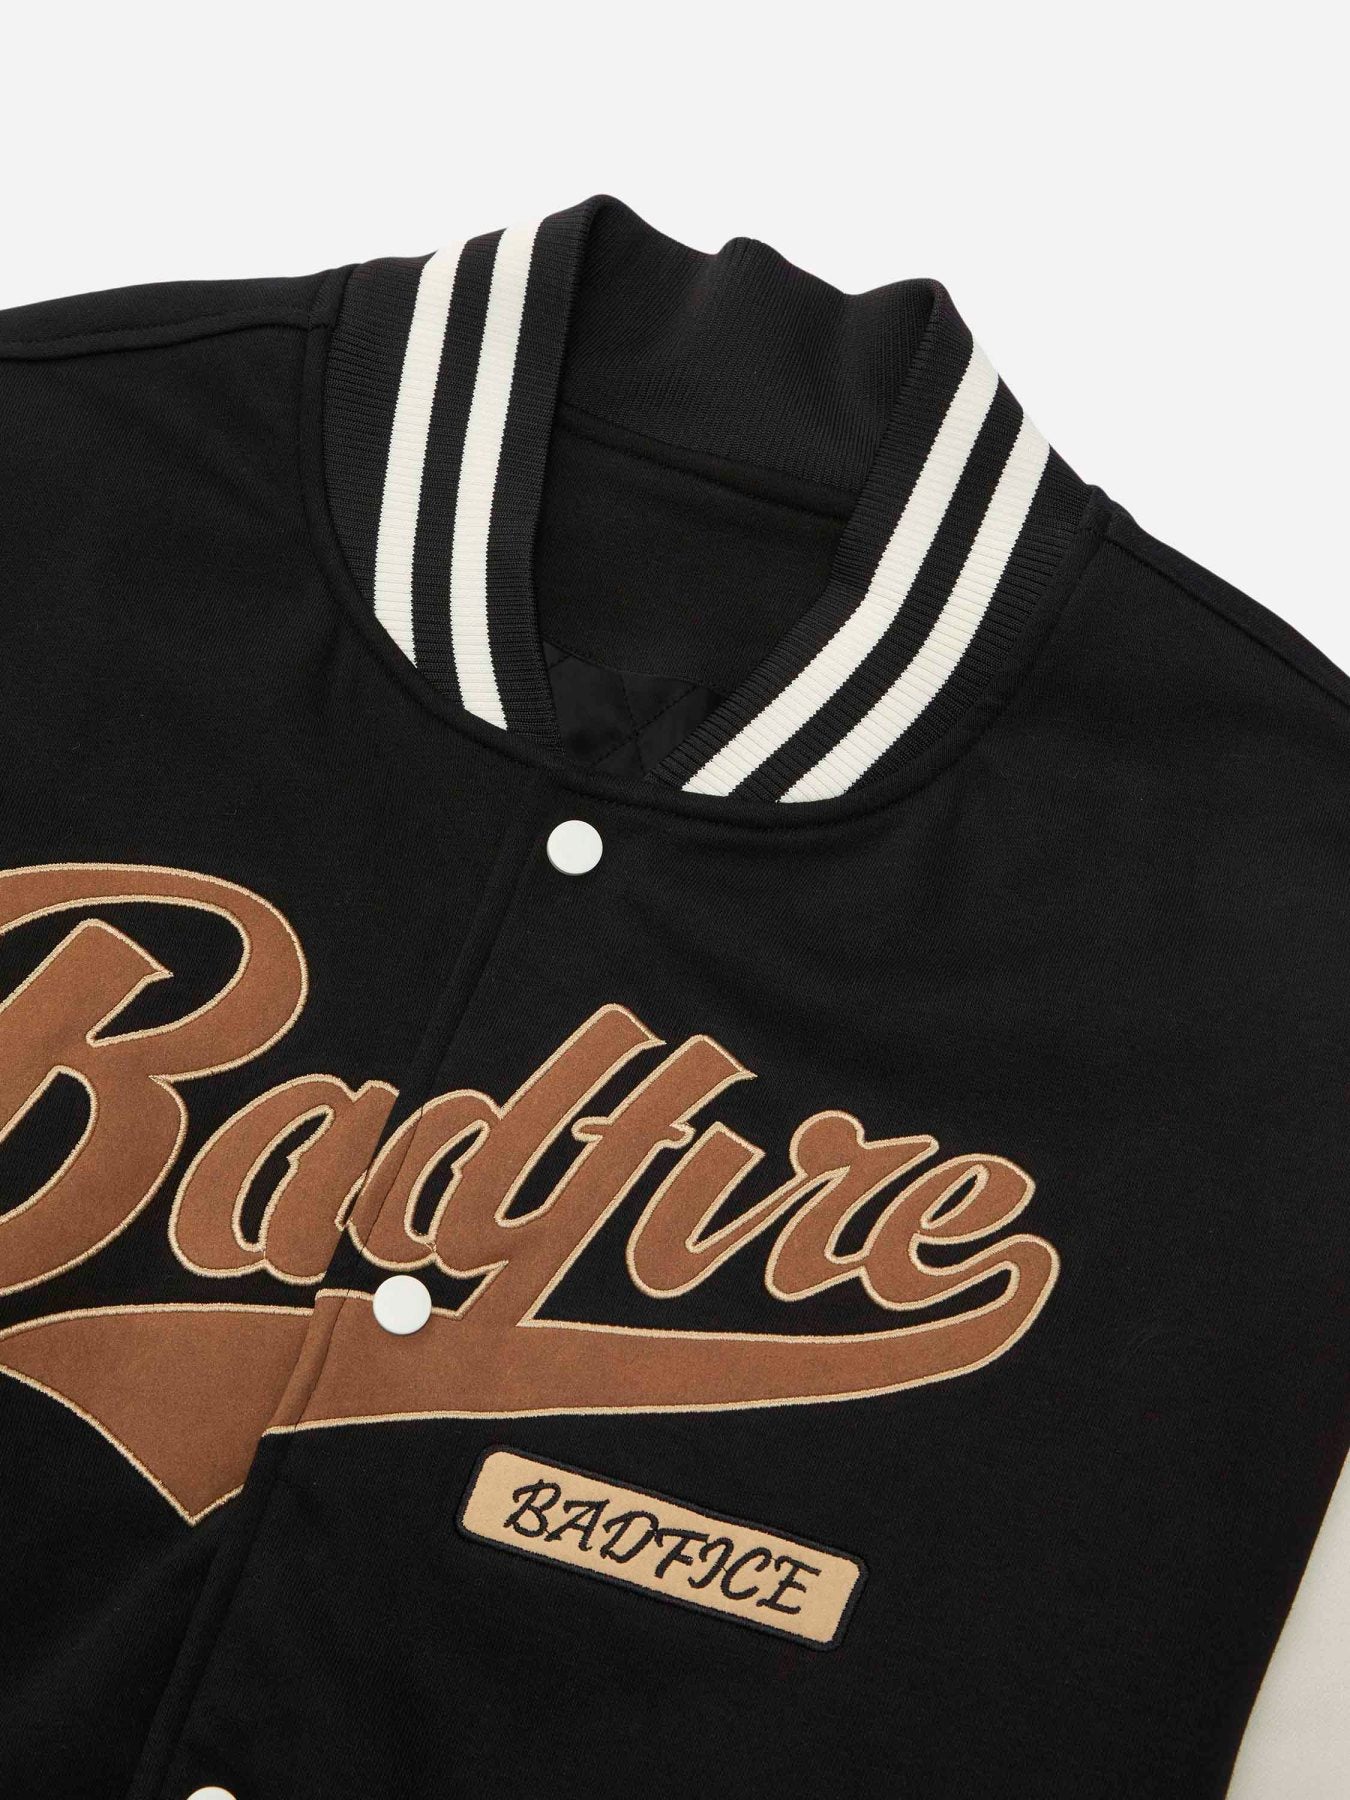 The Supermade Embroidered Baseball Uniform